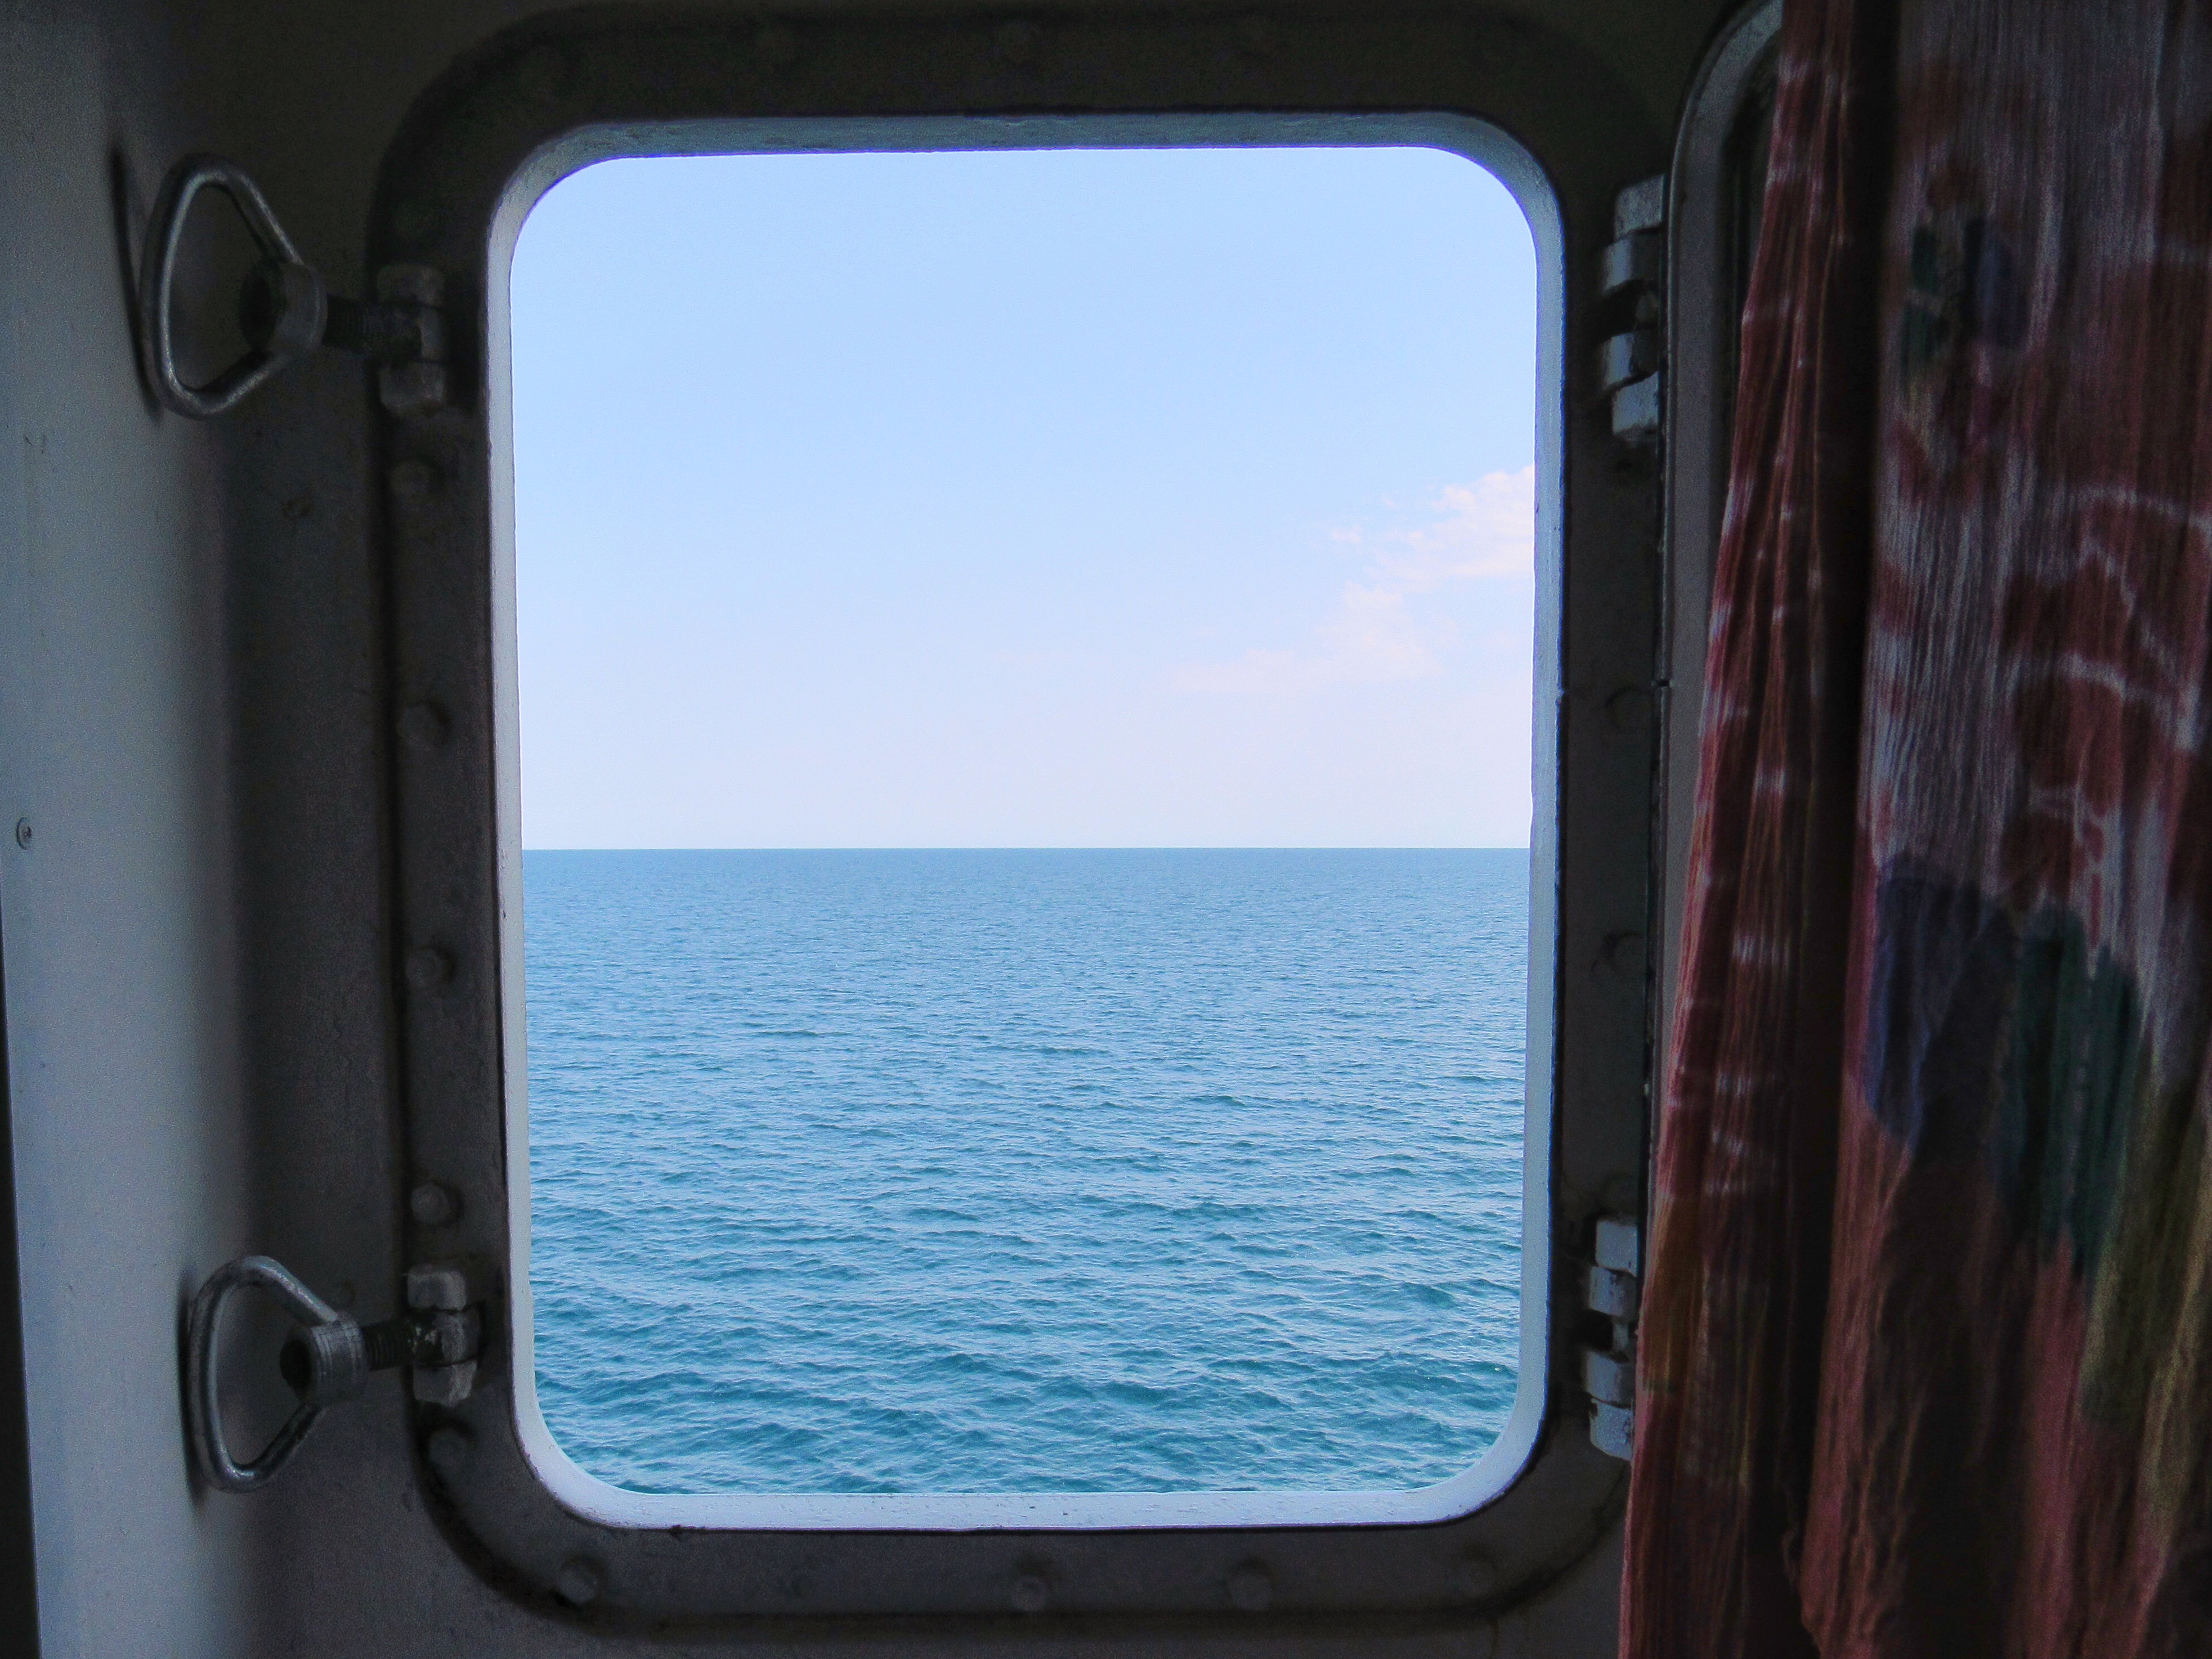 View through the ferry cabin window